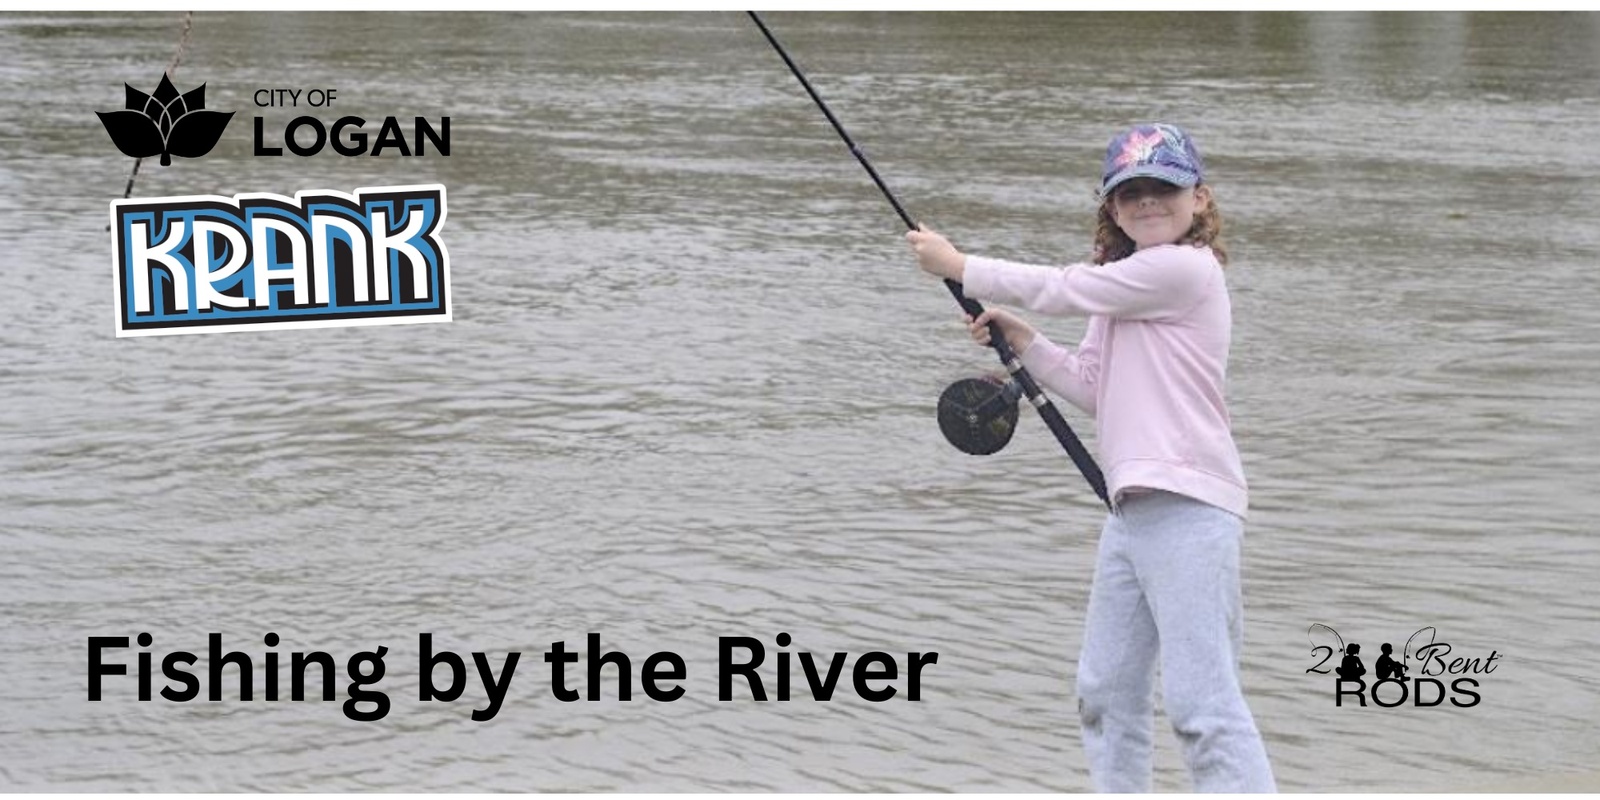 Banner image for Krank - Fishing by the River - Tygum Lagoon